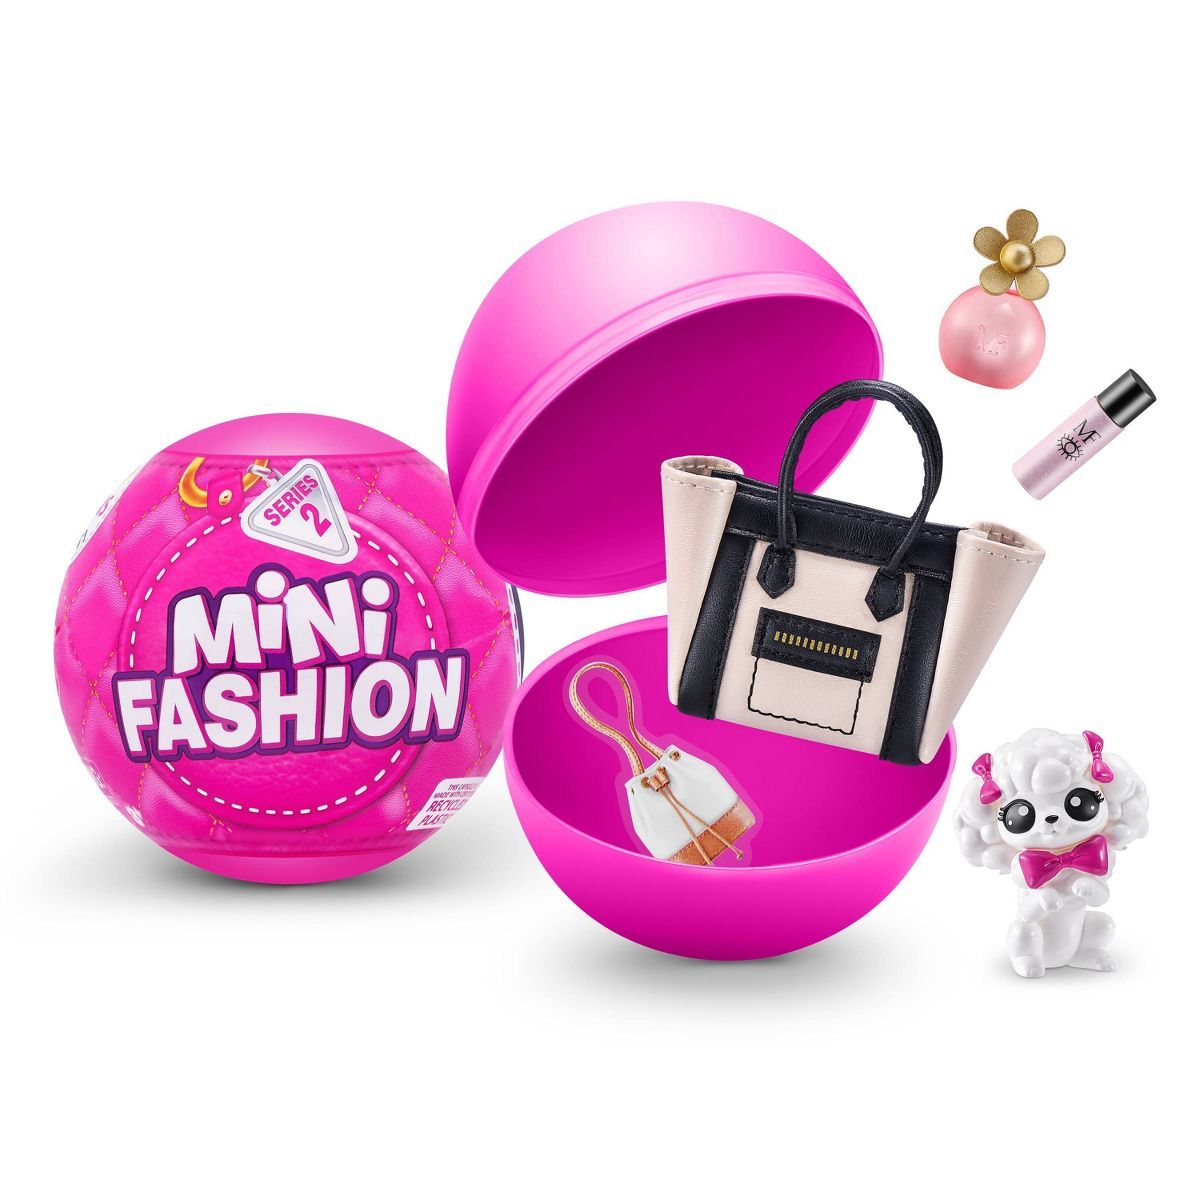 5 Surprise Mini Fashion Series 2 Collectible Capsule Toy by ZURU | Target